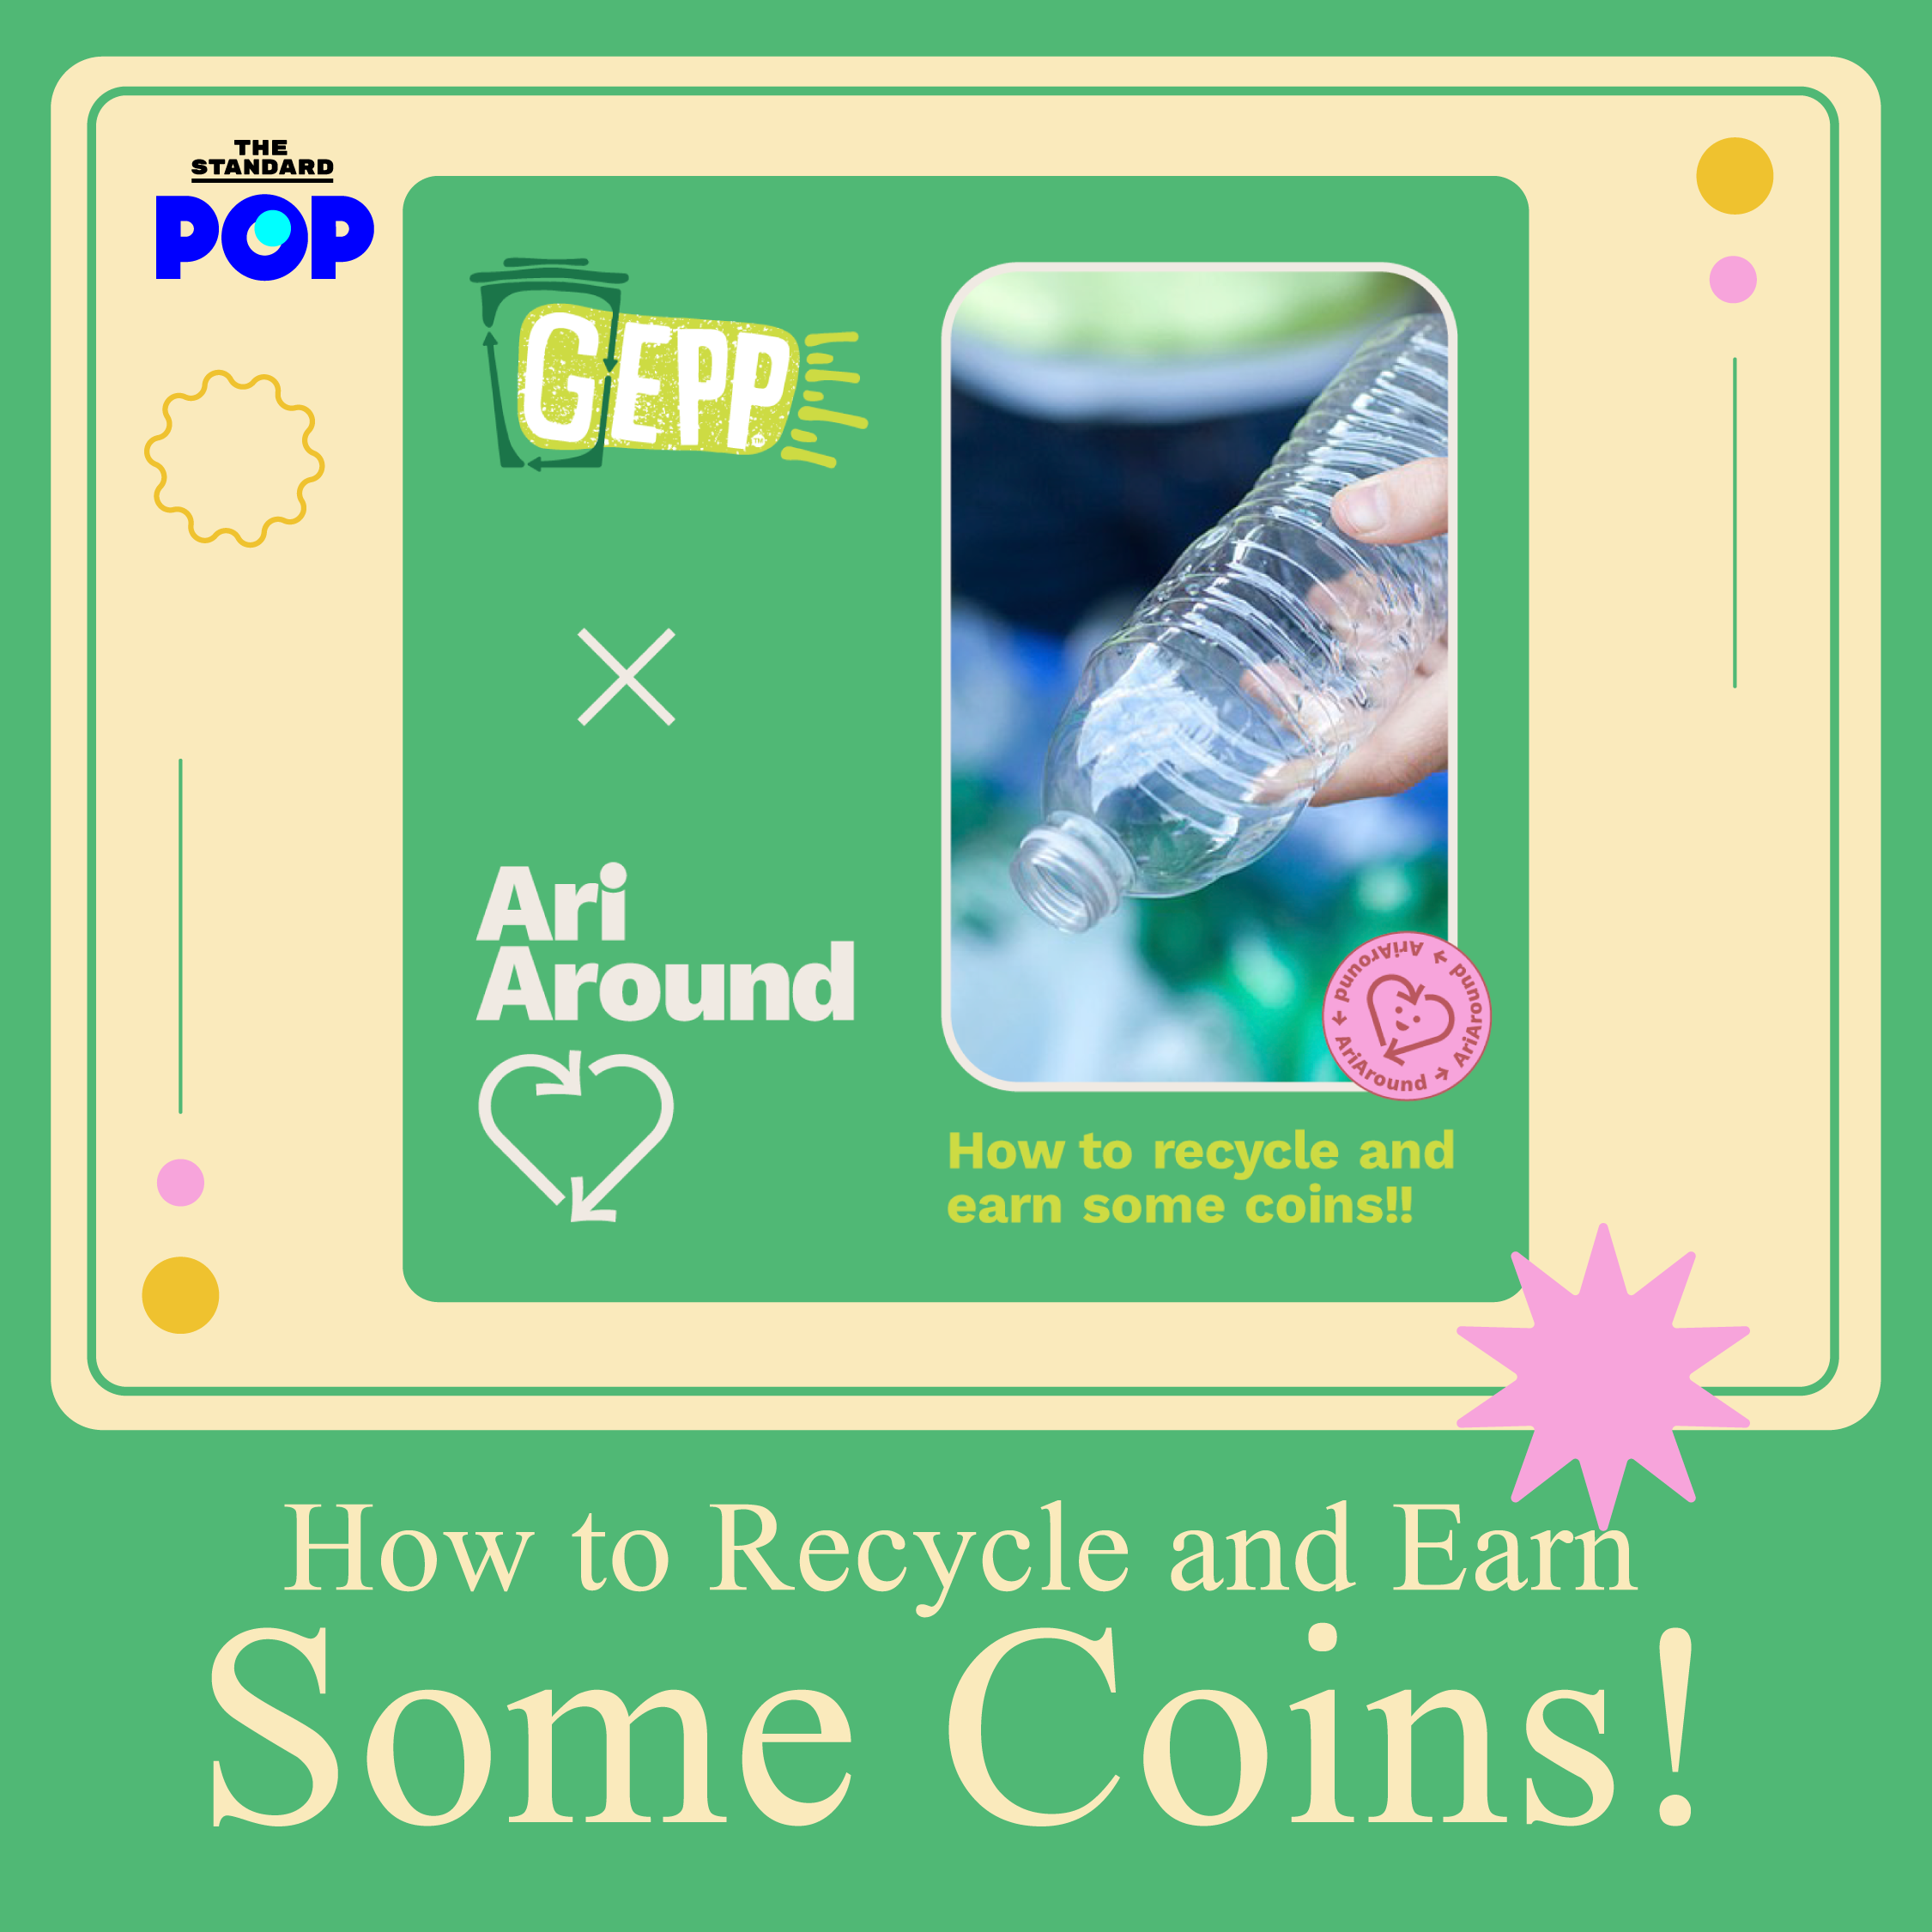 How to Recycle and Earn Some Coins!